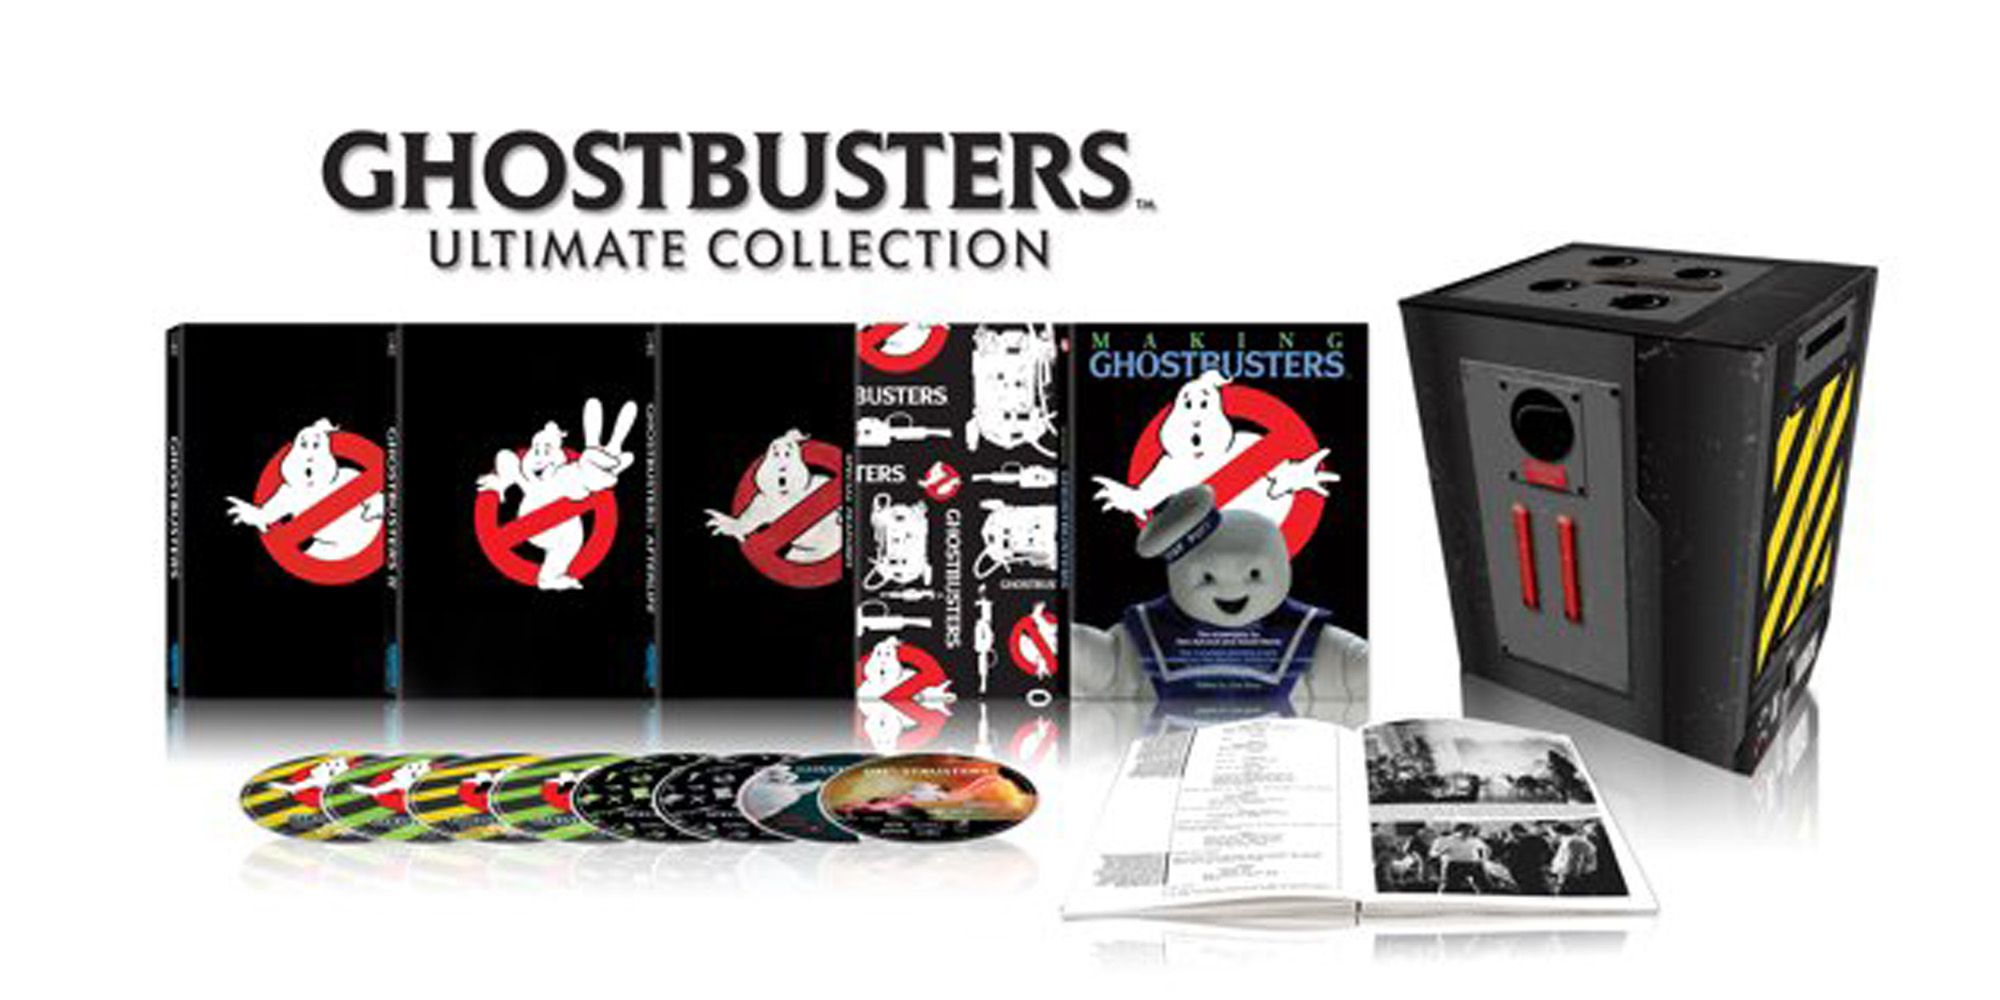 Ghostbusters 4K Box Set Collection Comes With Ghost Trap Packaging